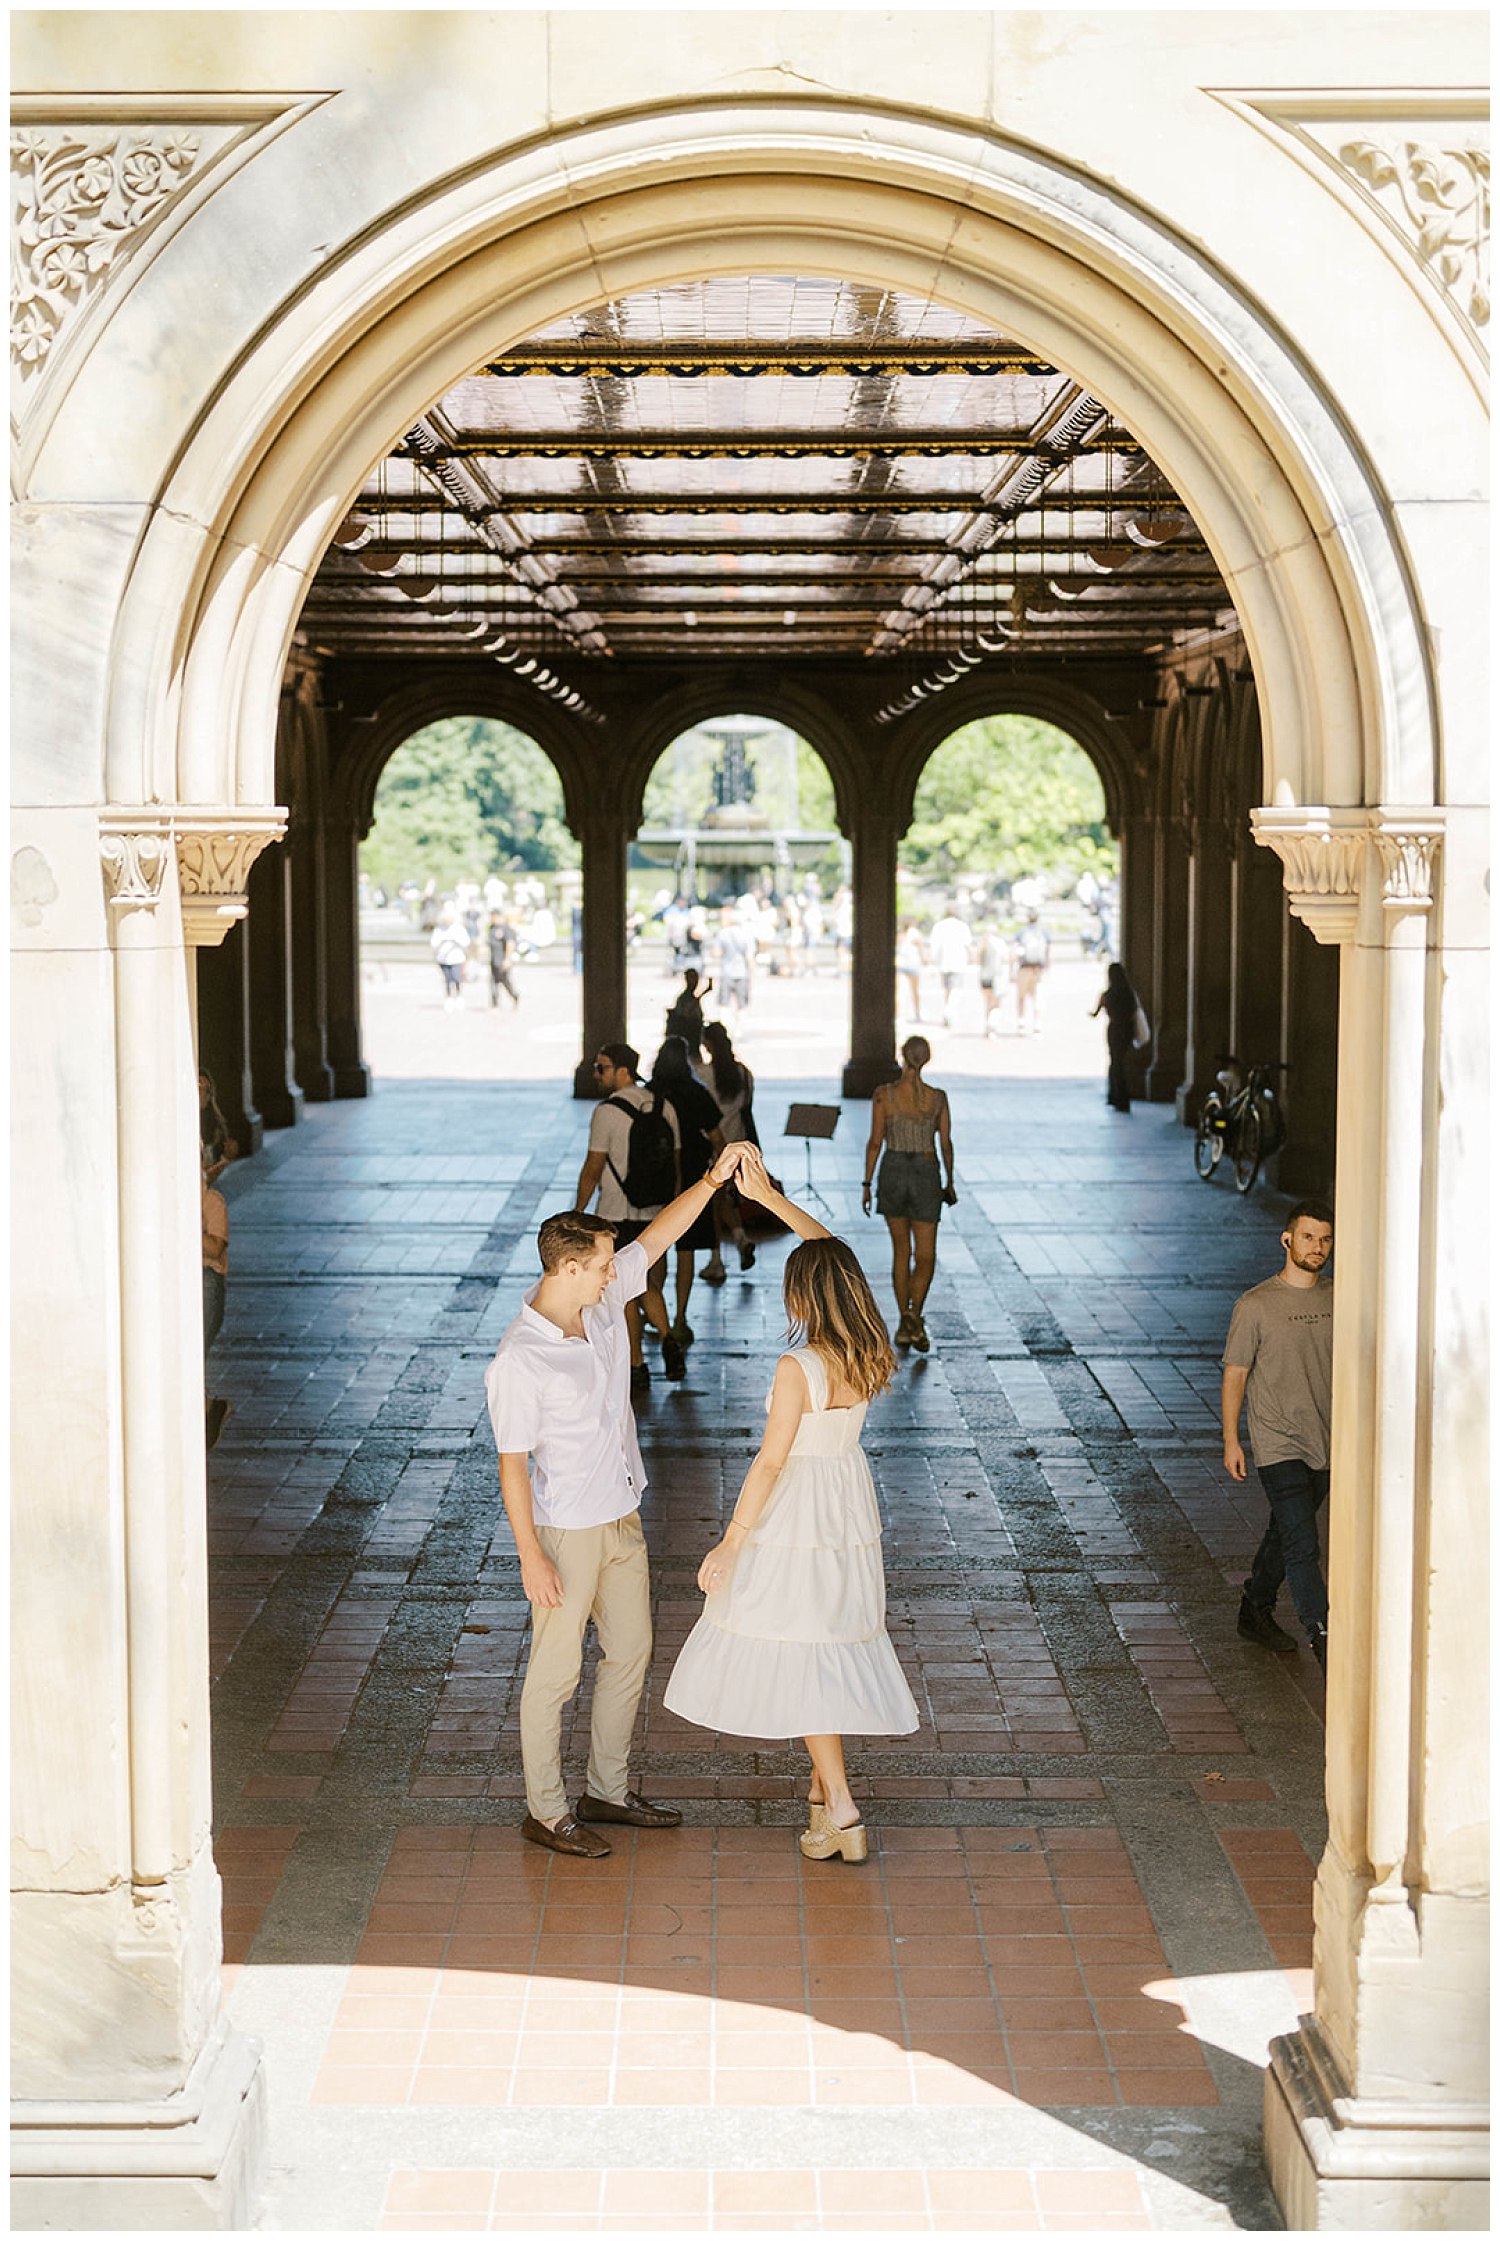 couple twirling underneath an arch at Central Park in New York